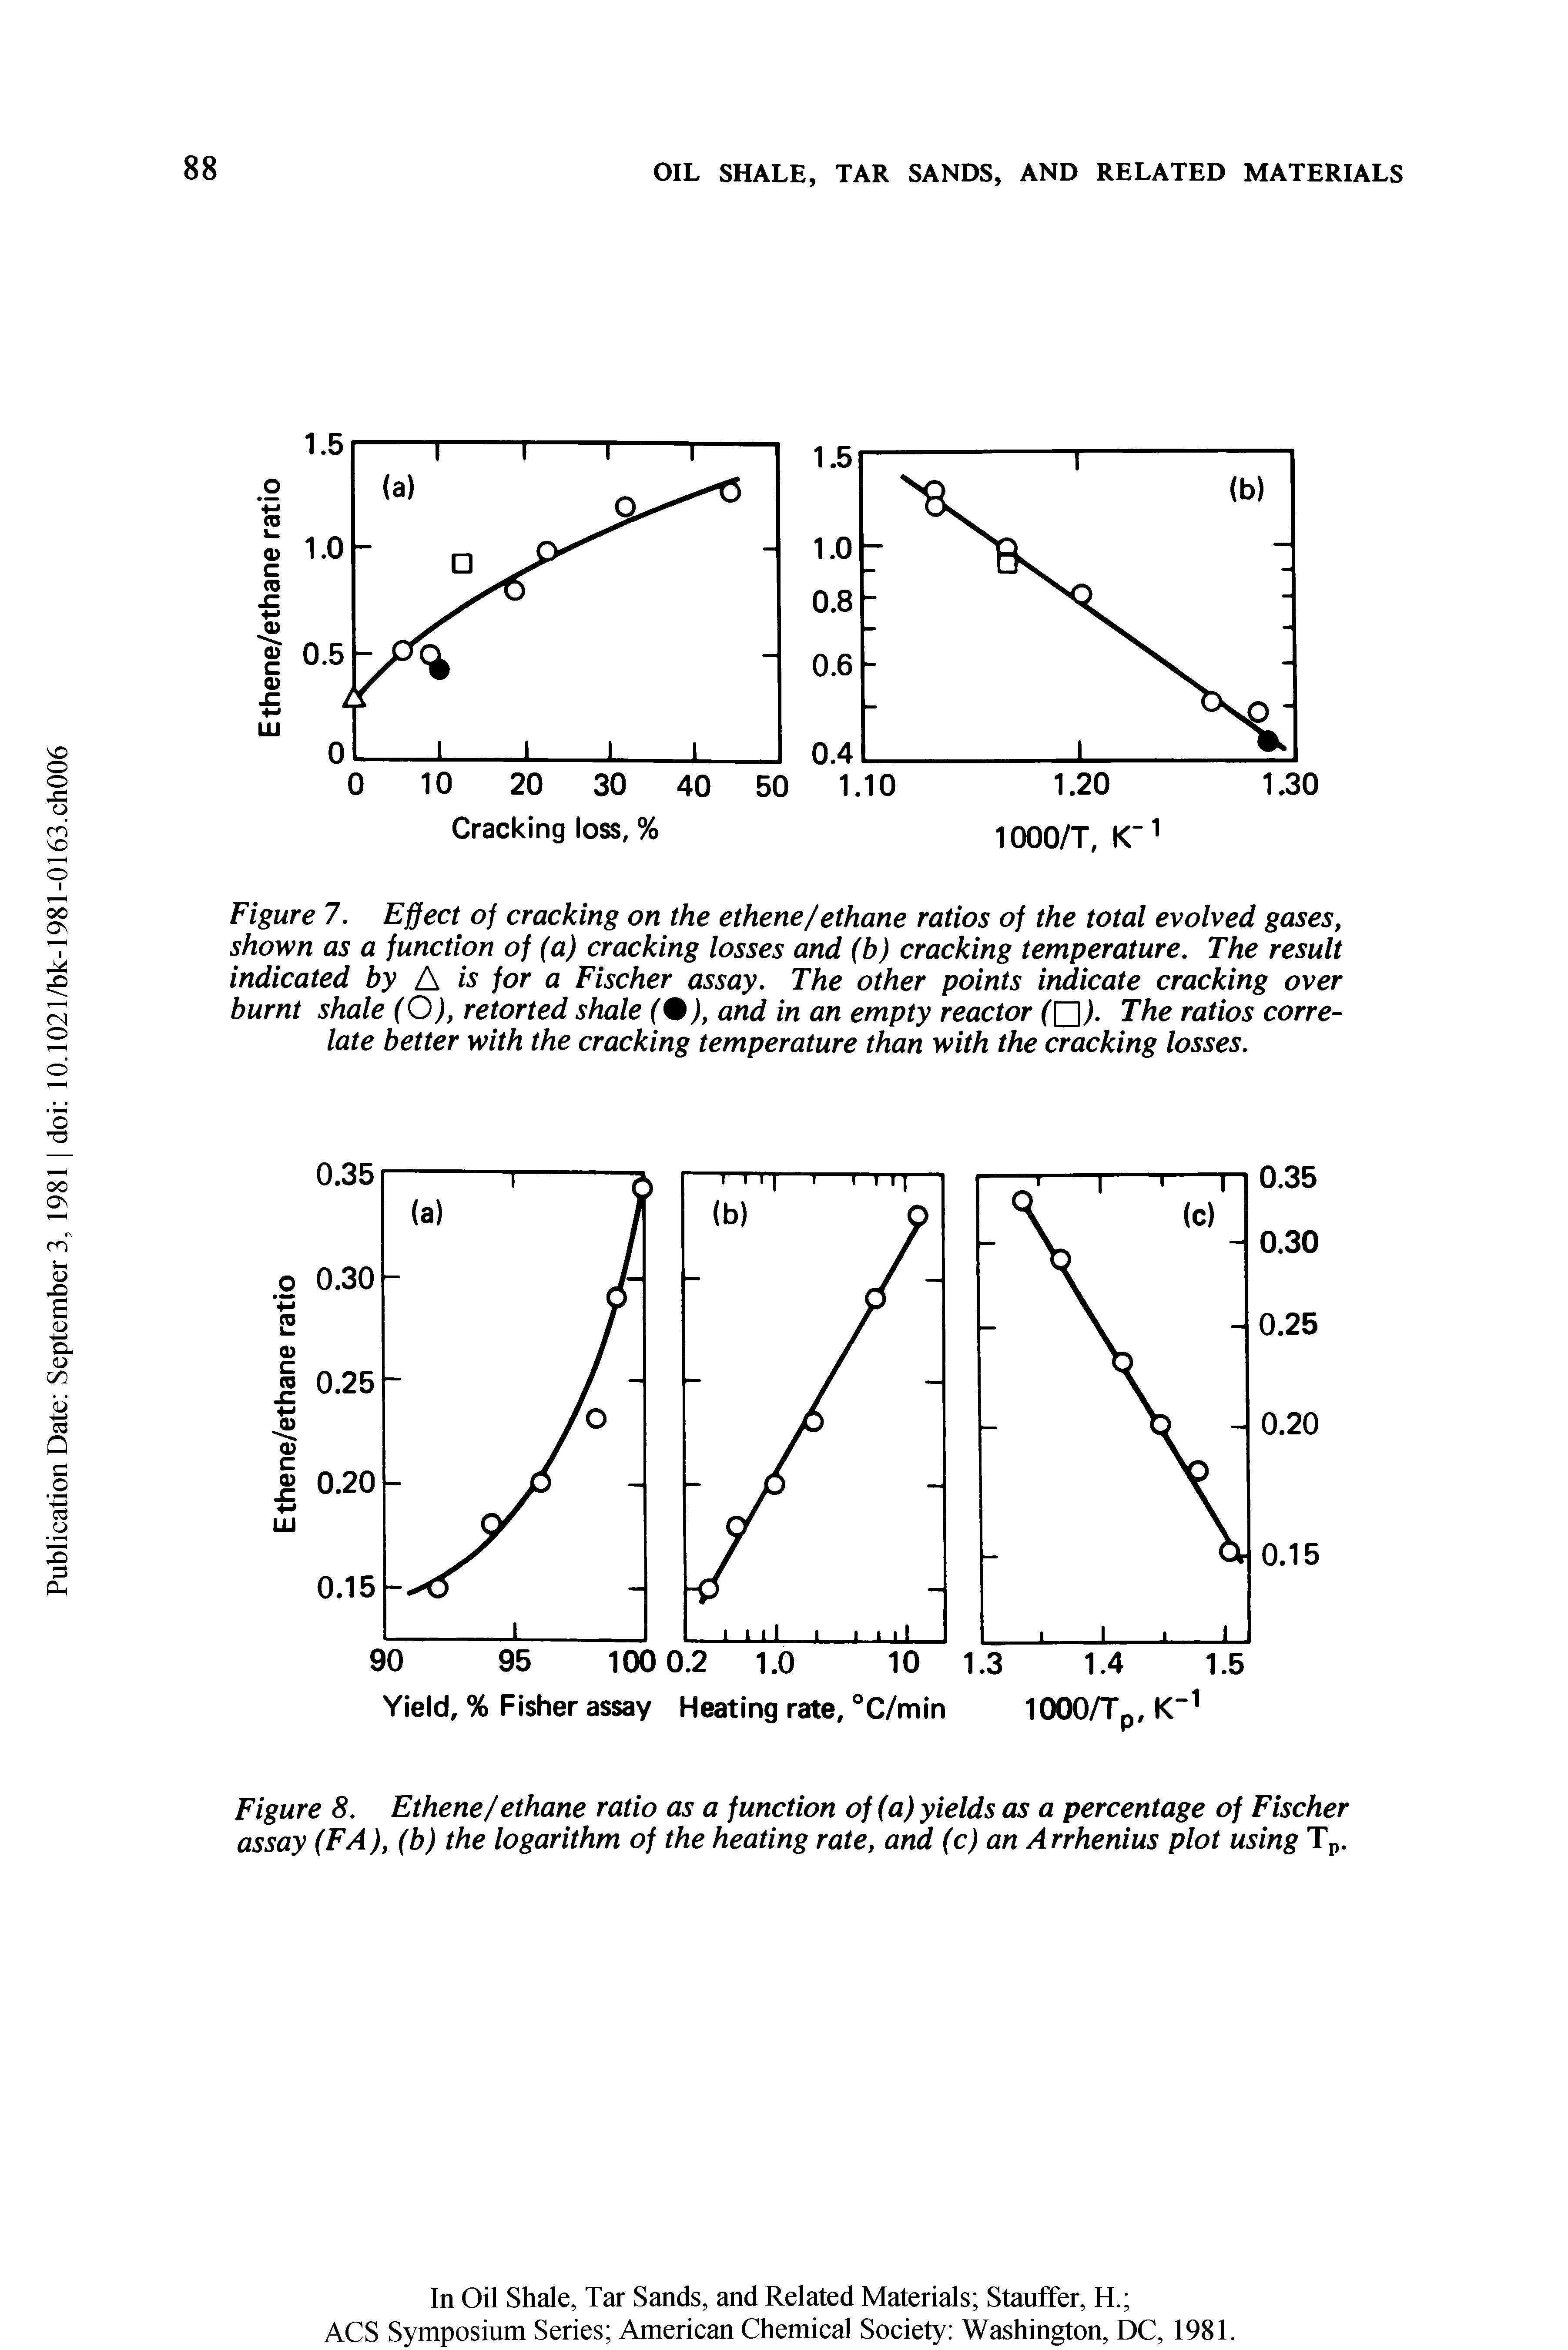 Figure 8. Ethene/ethane ratio as a function of (a) yields as a percentage of Fischer assay (FA), (b) the logarithm of the heating rate, and (c) an Arrhenius plot using Tp.